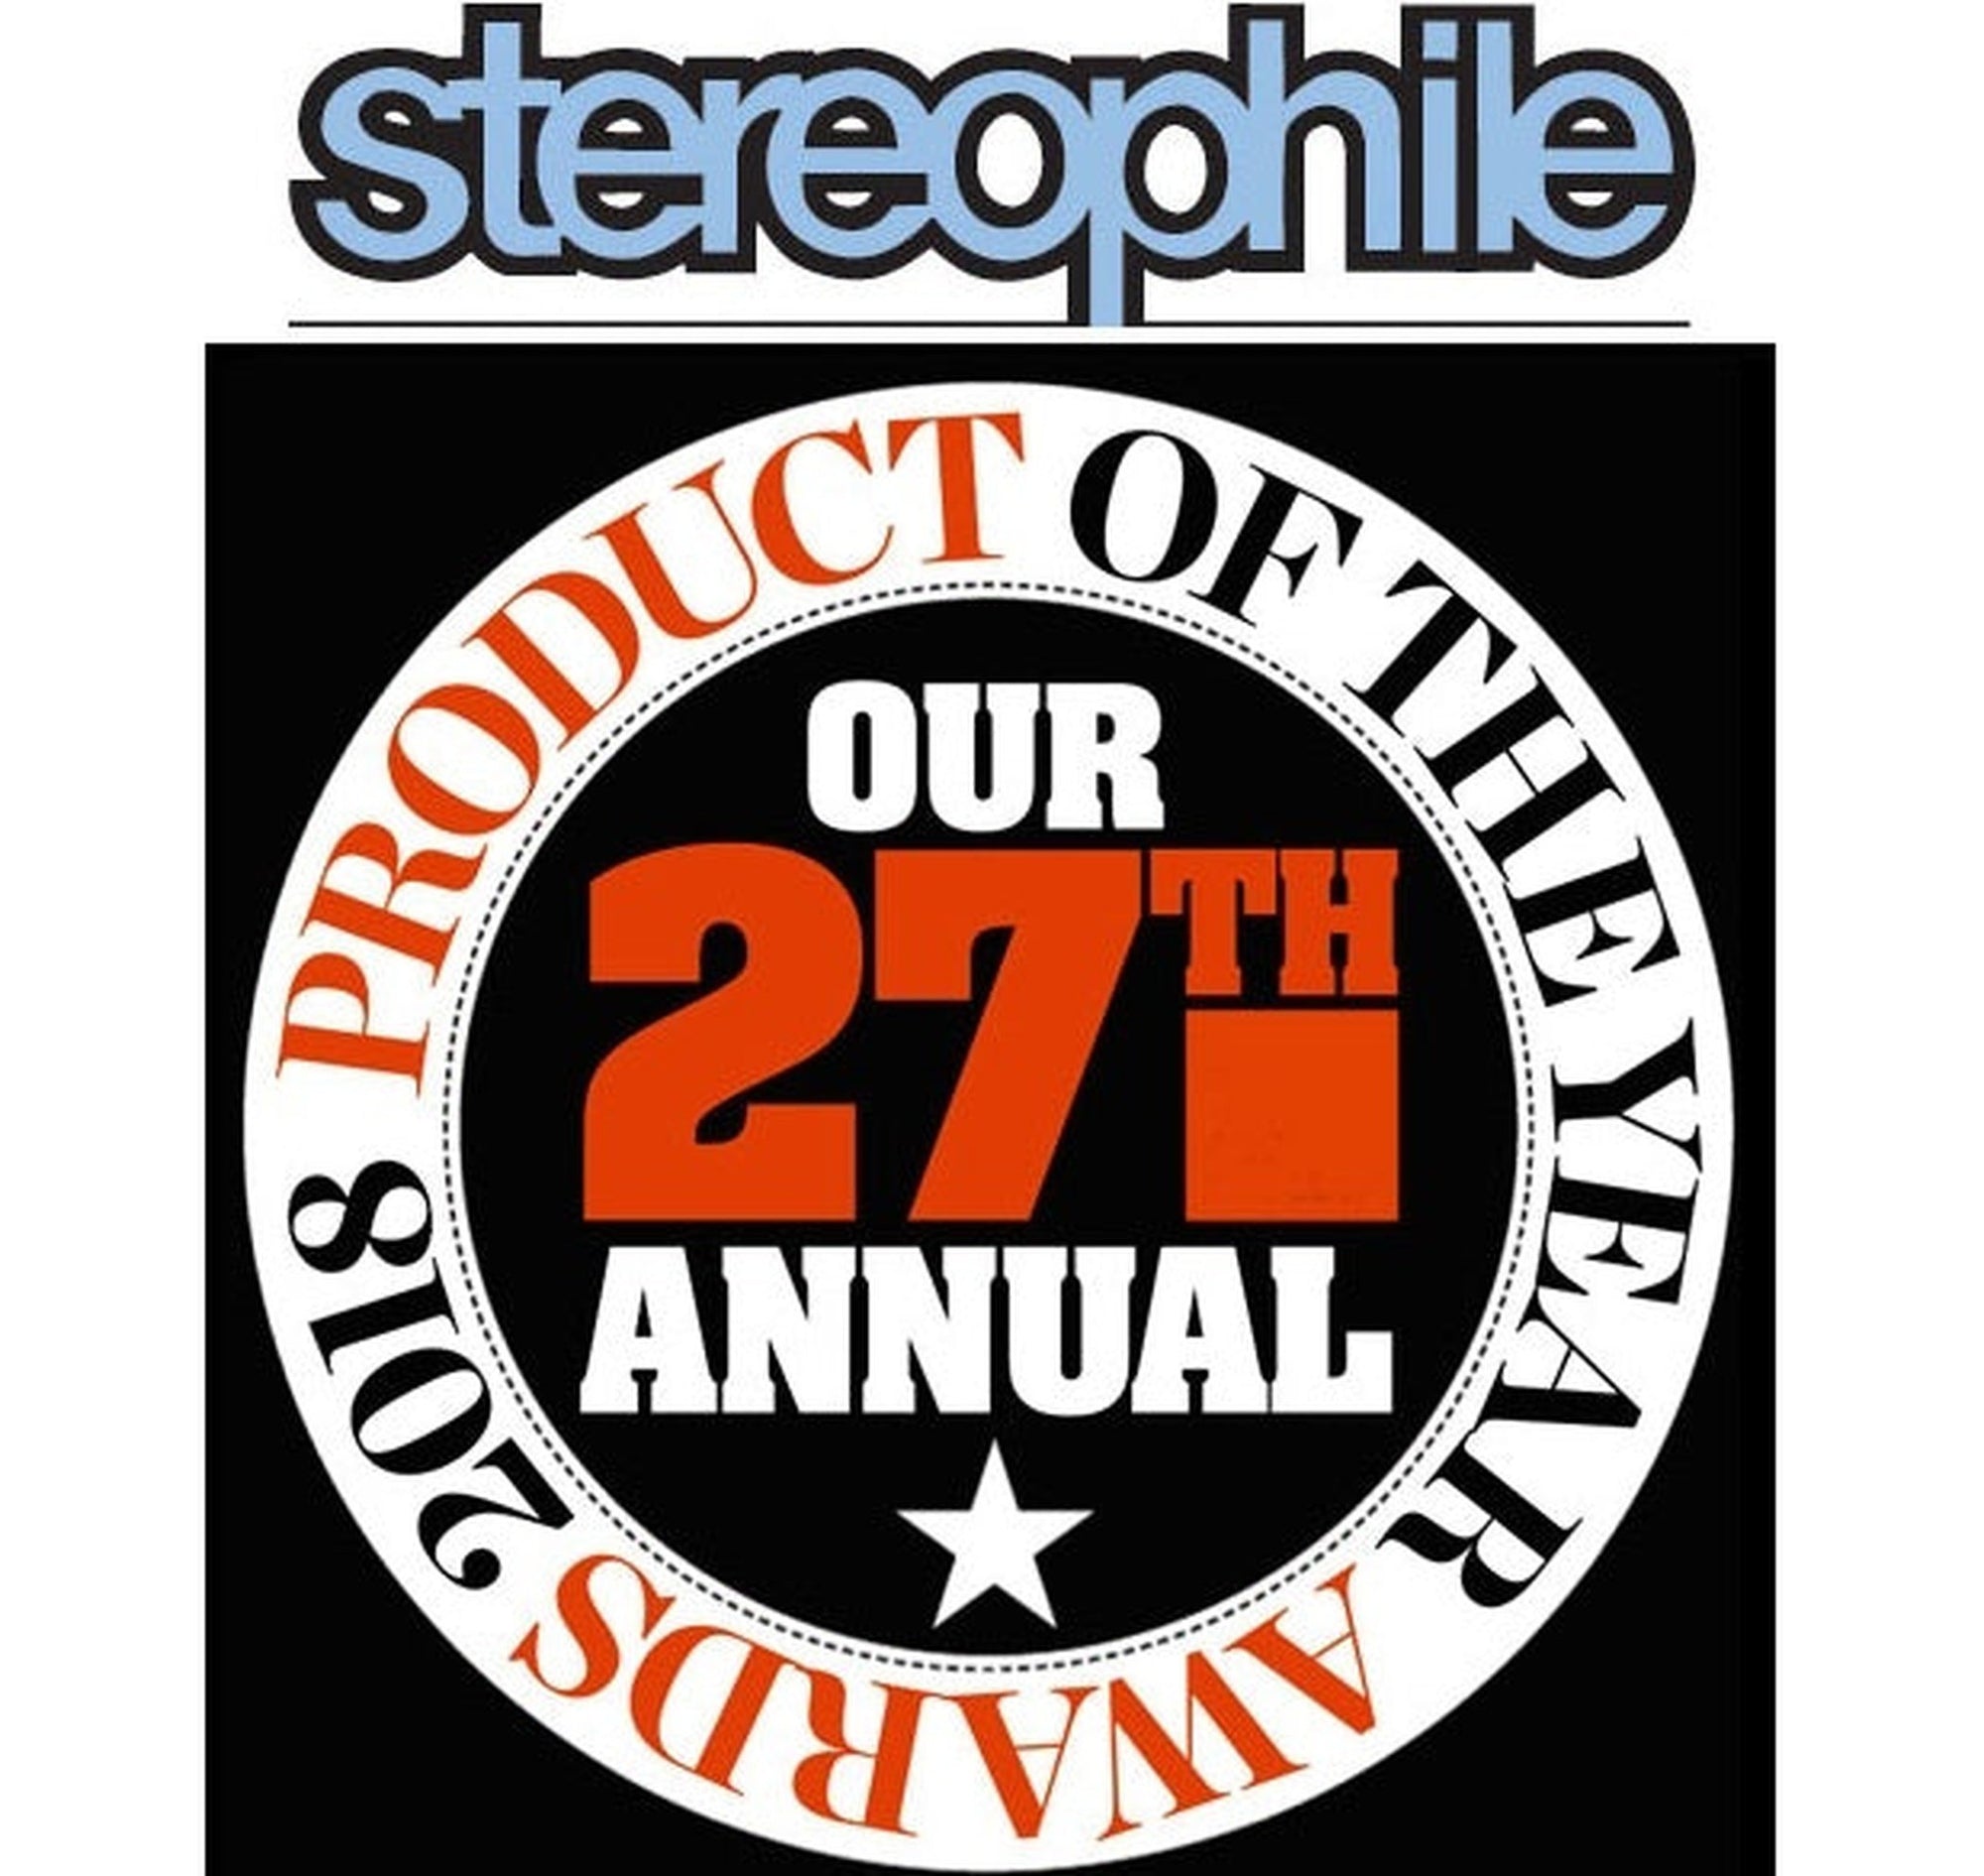 Stereophile 2018 Product of the Year Award